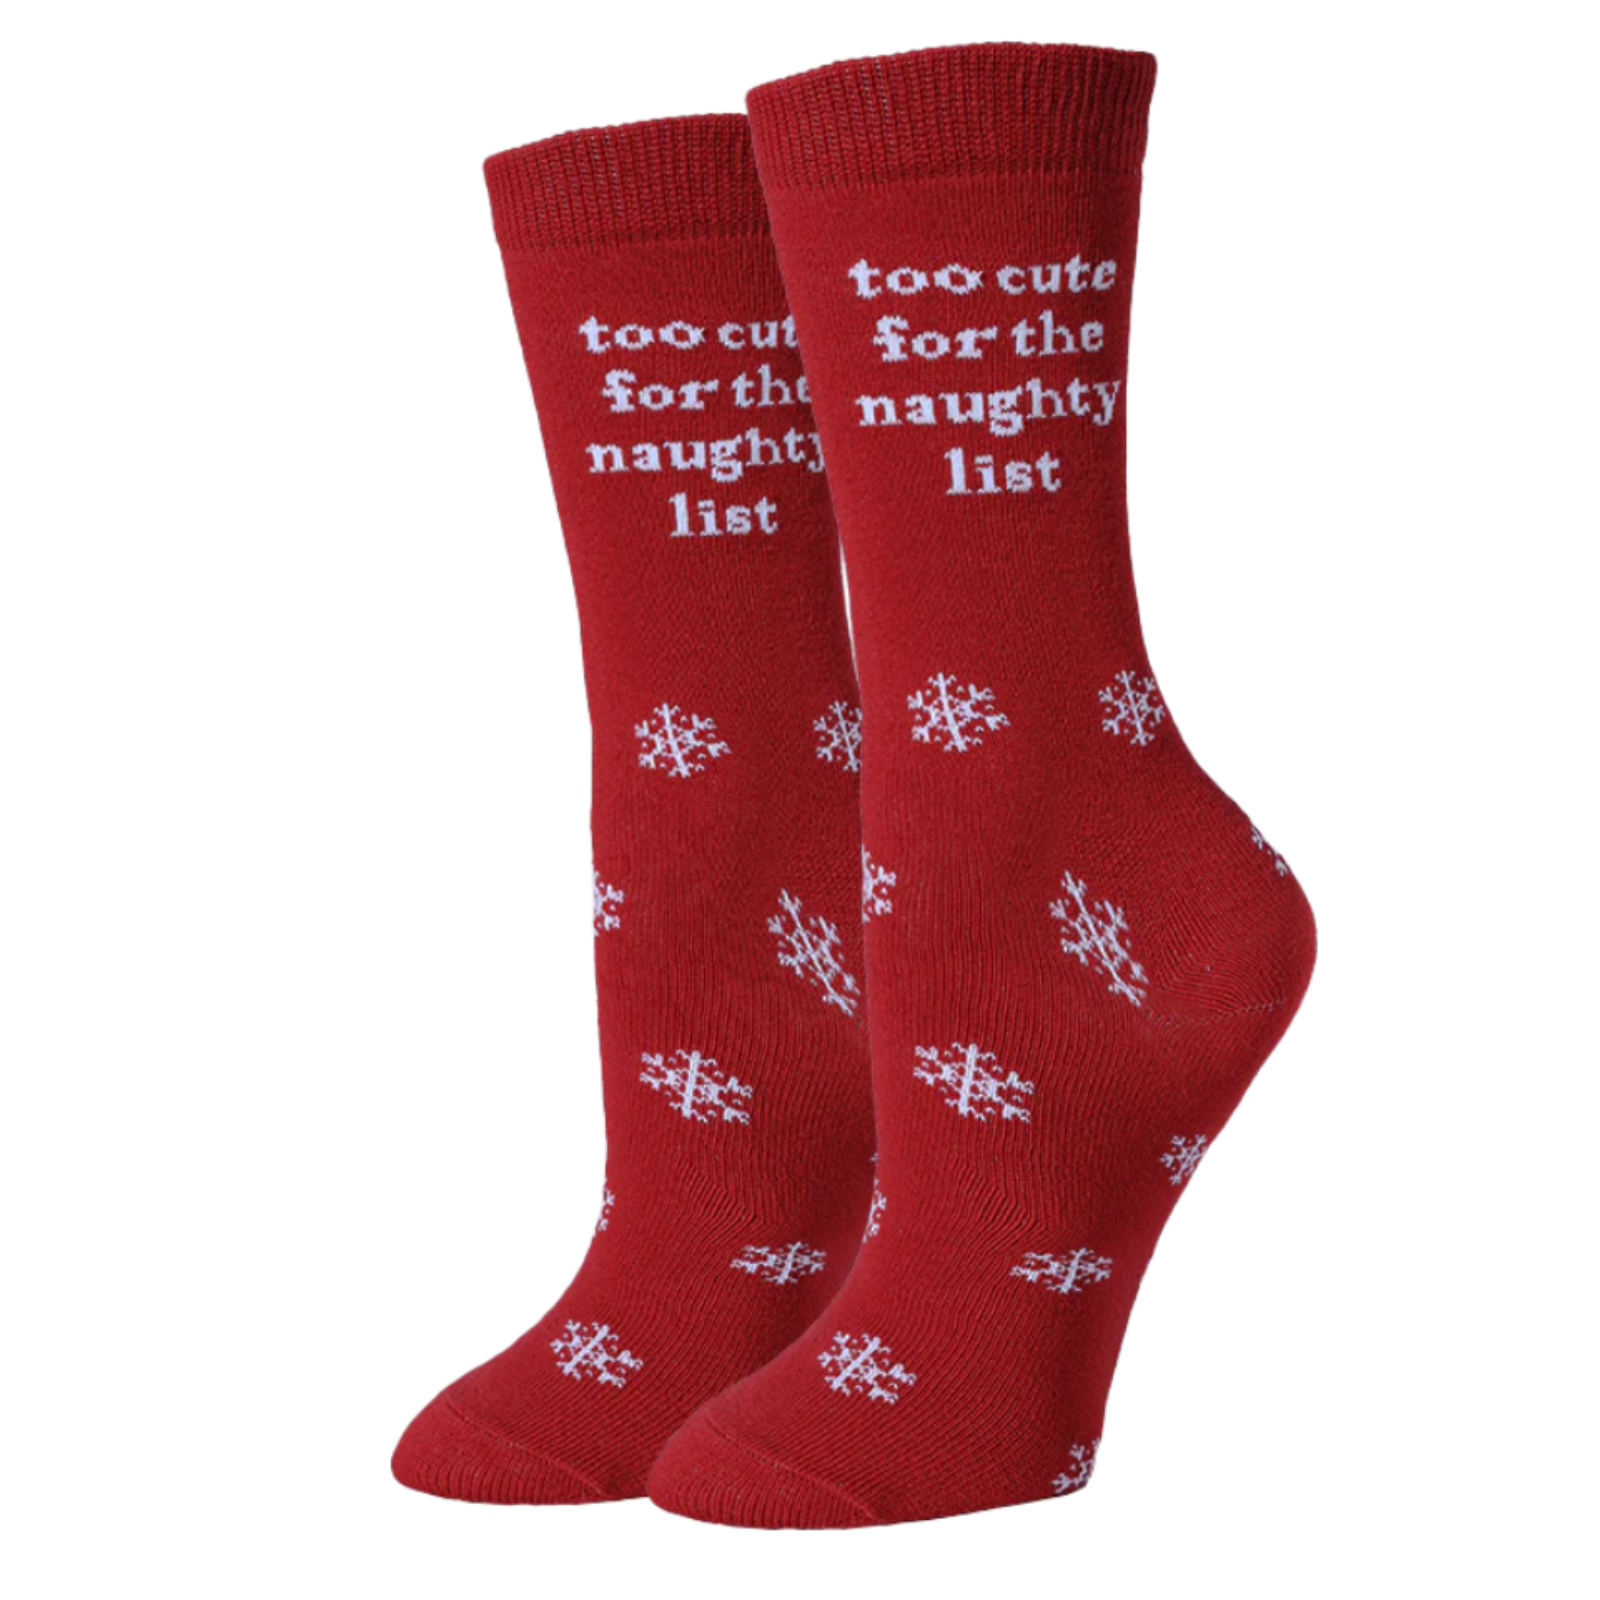 Sock Harbor Too Cute women's crew sock featuring red sock with snowflakes and "too cute for the naughty list". Socks shown on display feet. 